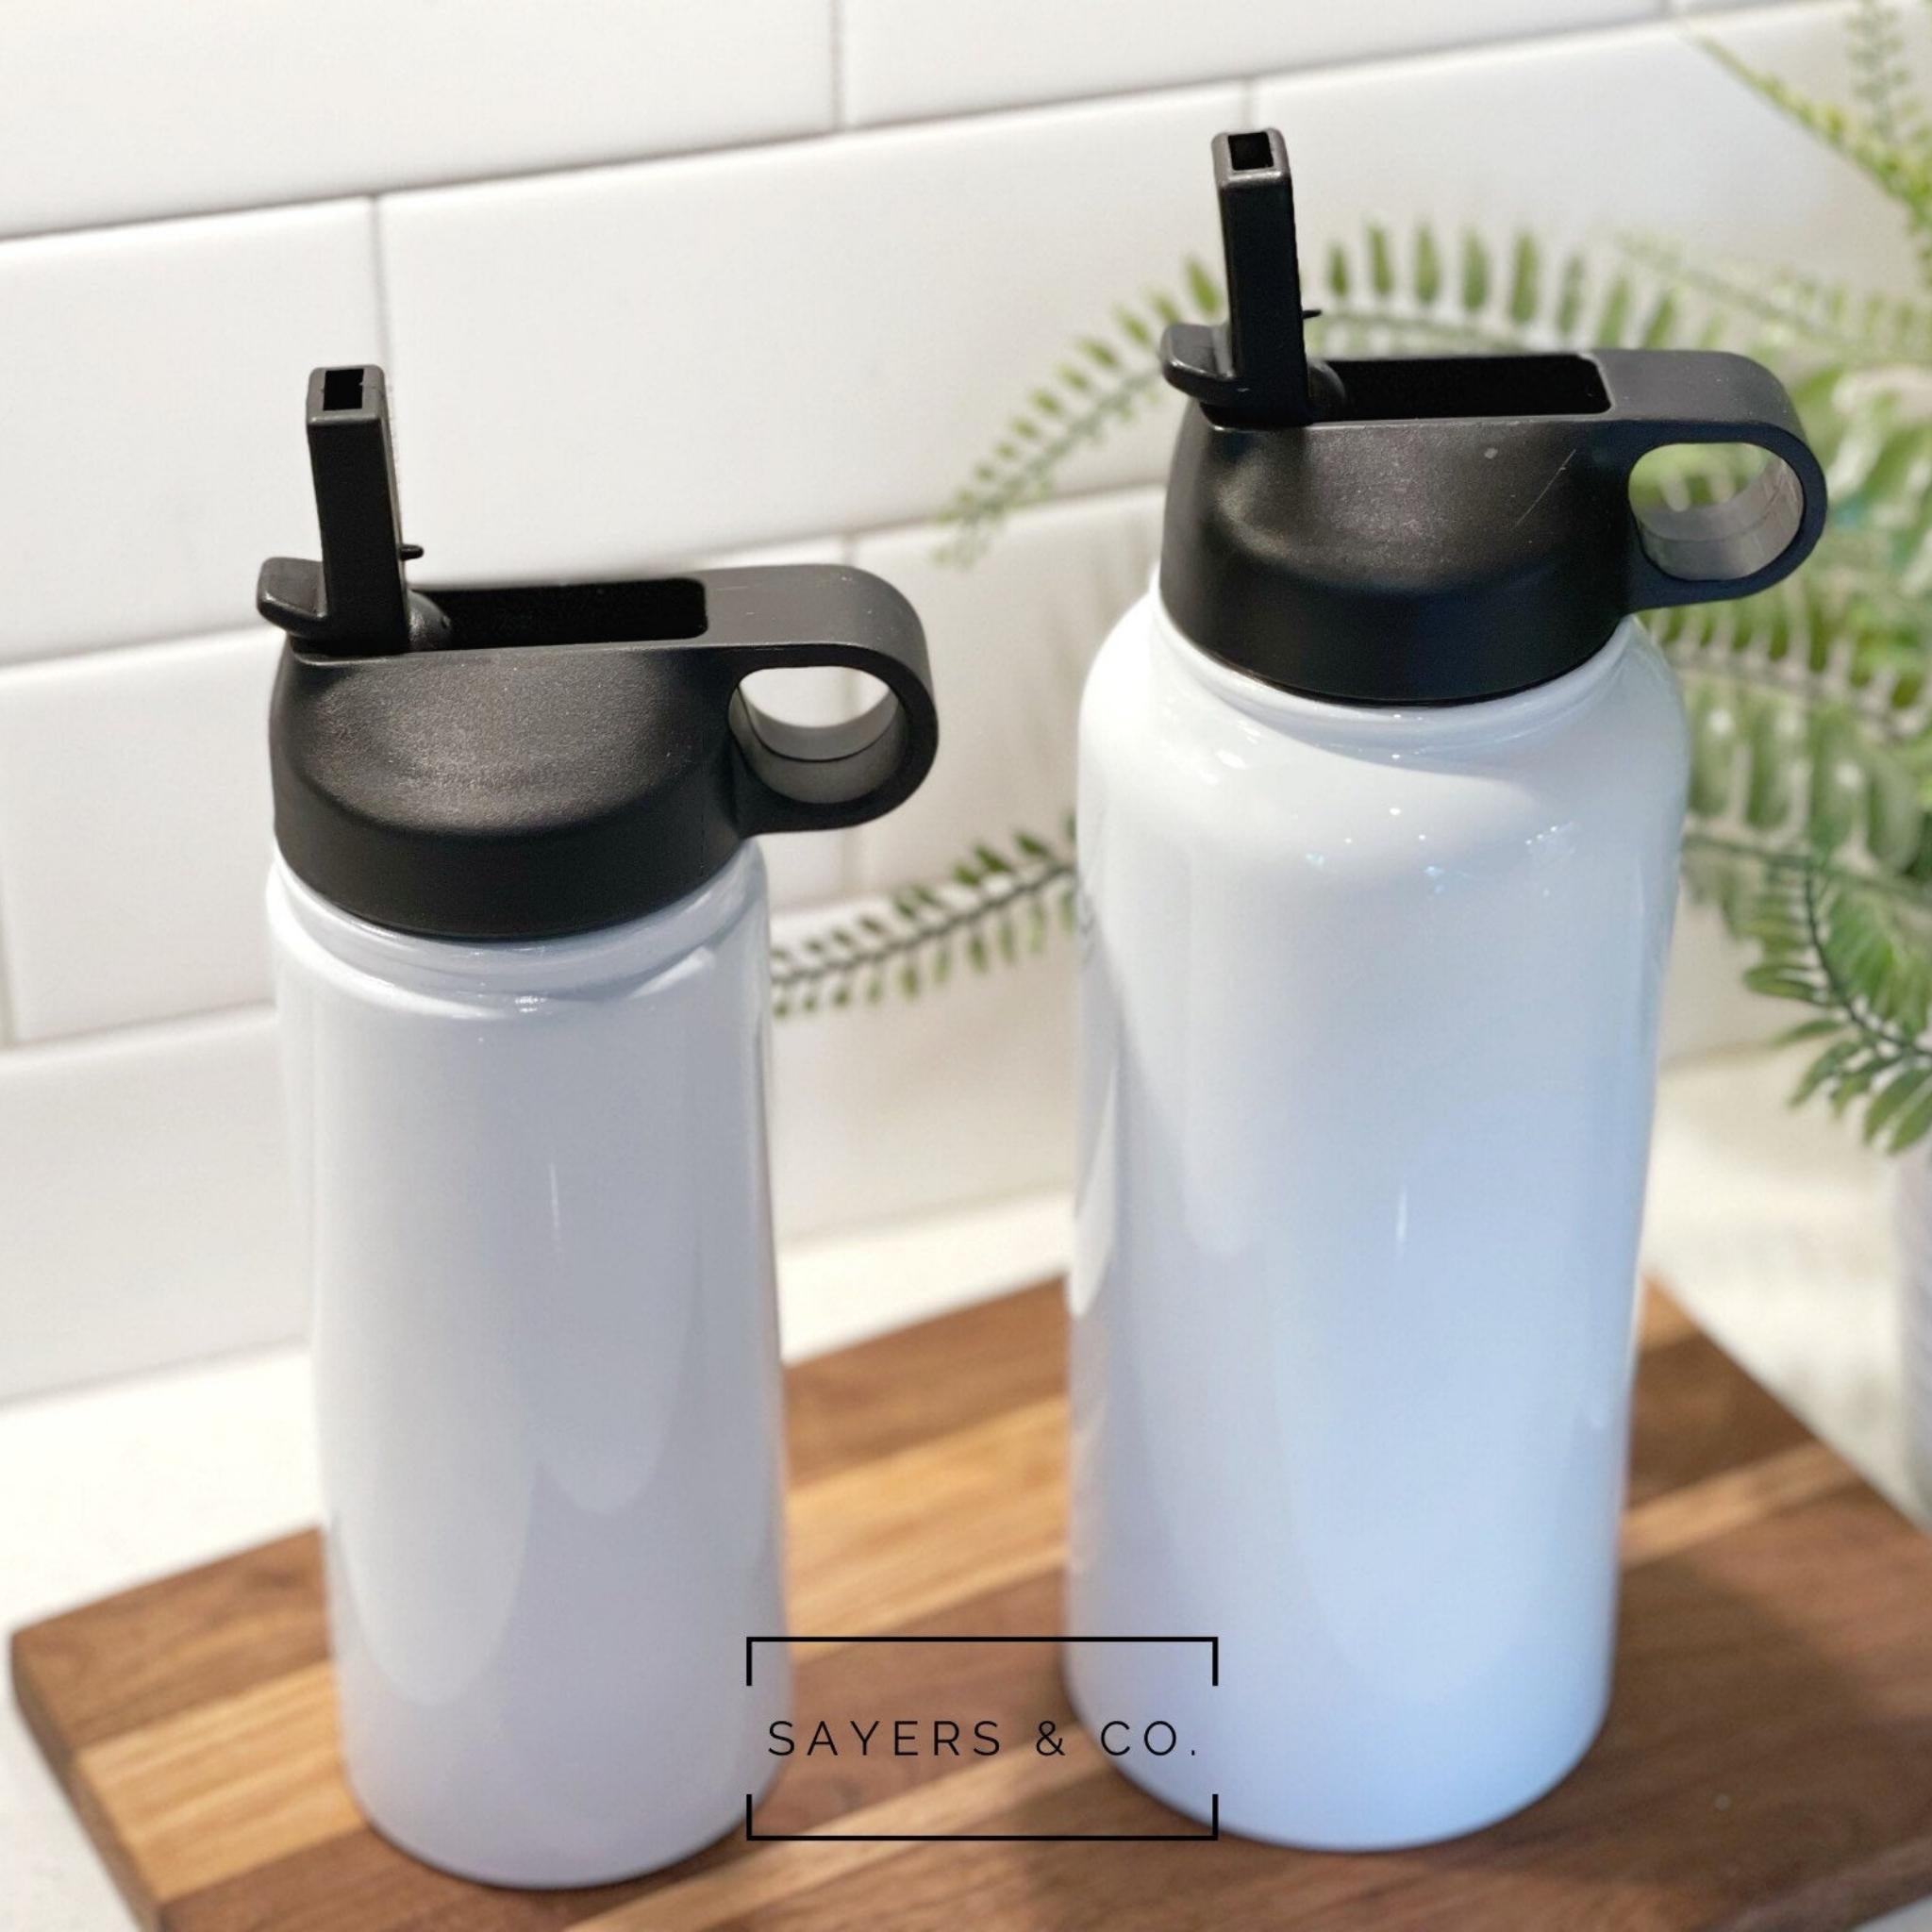 18 oz Sport Bottle with Straw - Stainless Steel Insulated Blank Tumblers